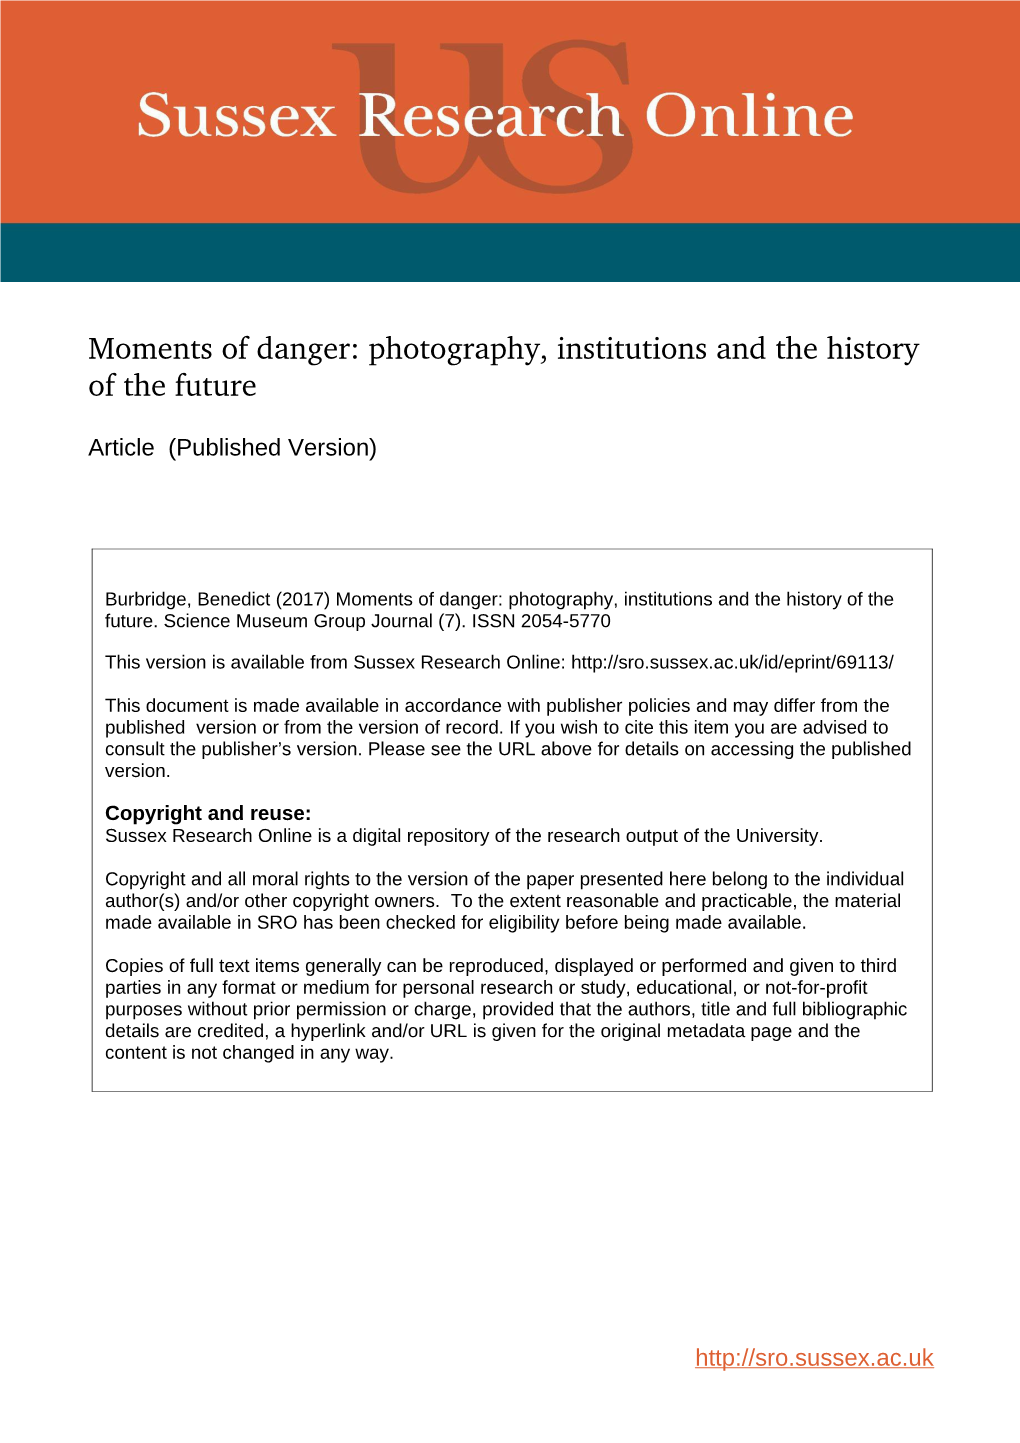 Moments of Danger: Photography, Institutions and the History of the Future